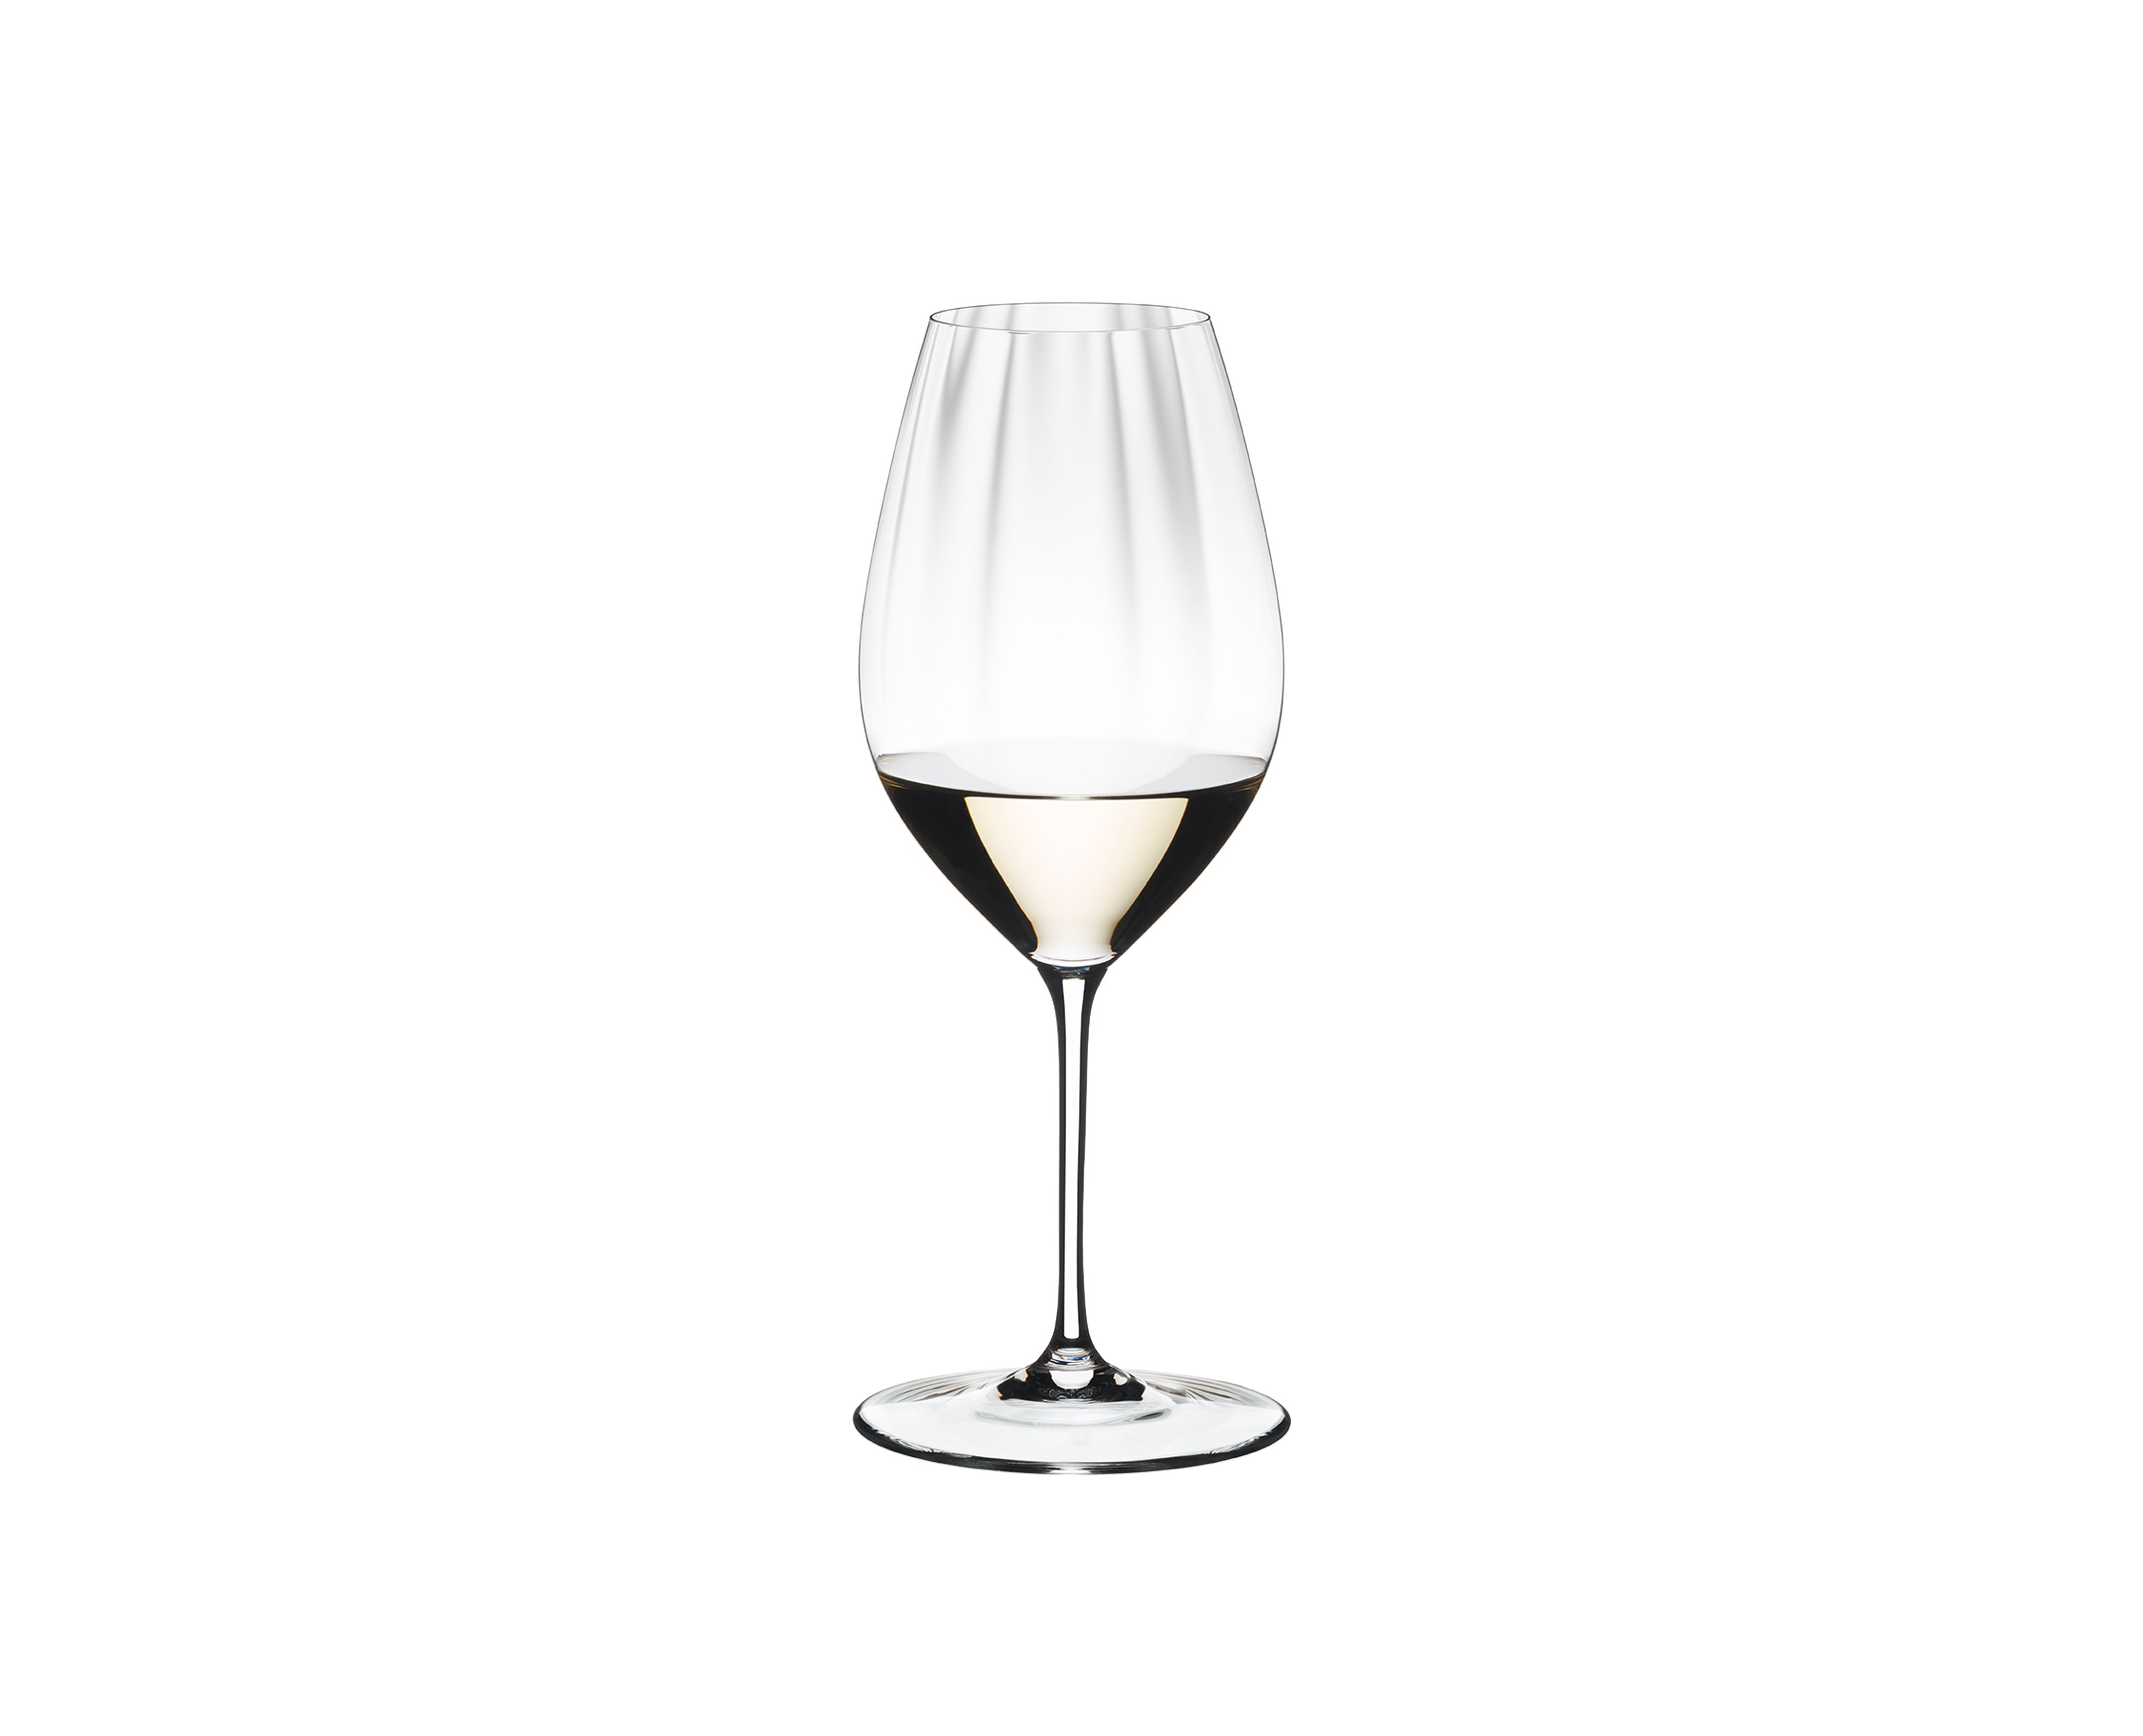 Riedel Performance Riesling Glass, Set of 2, 22oz